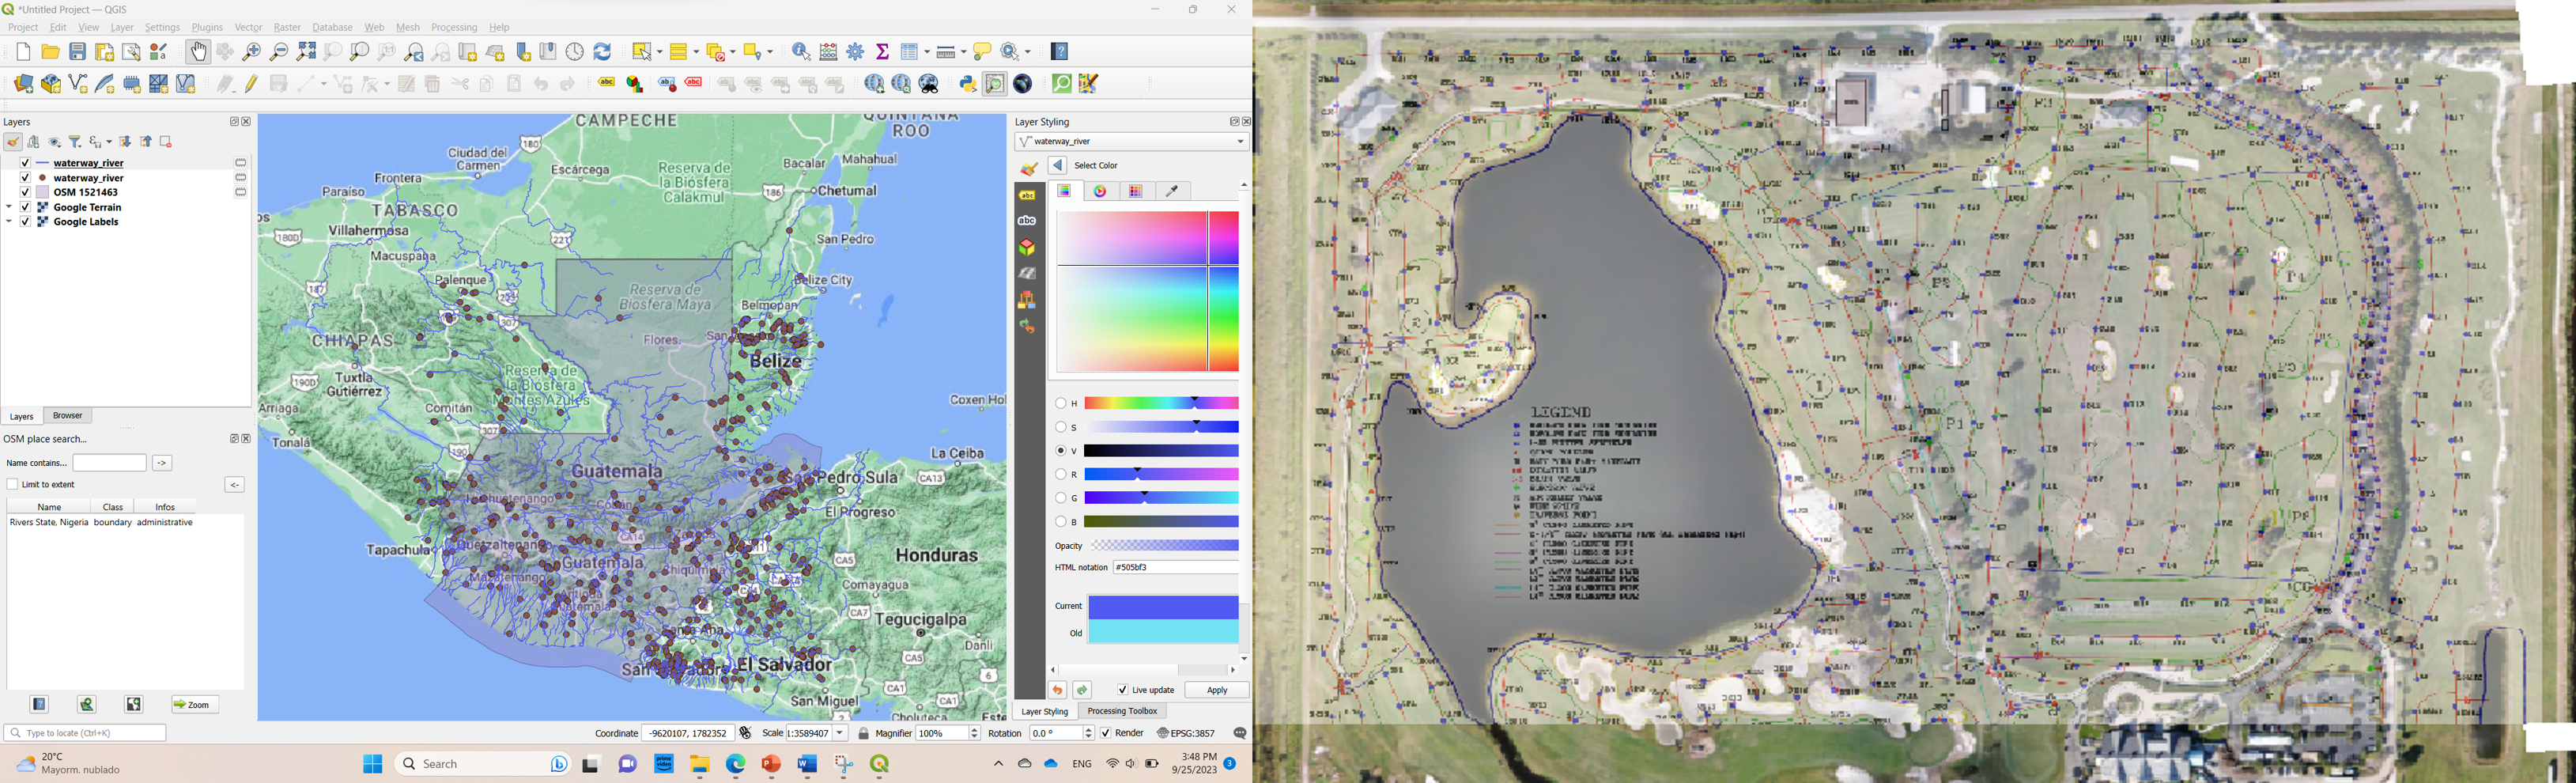 Examples of GIS technologies. LEFT: screen of QGIS (free access GIS software) where a base topographic map is being used to overlap vector layers of the Guatemalan political boundary and the waterways within the country. RIGHT is a base map created using a drone image to georeferenced an irrigation map for a golf course in Florida (Pictures by: Arturo F.)